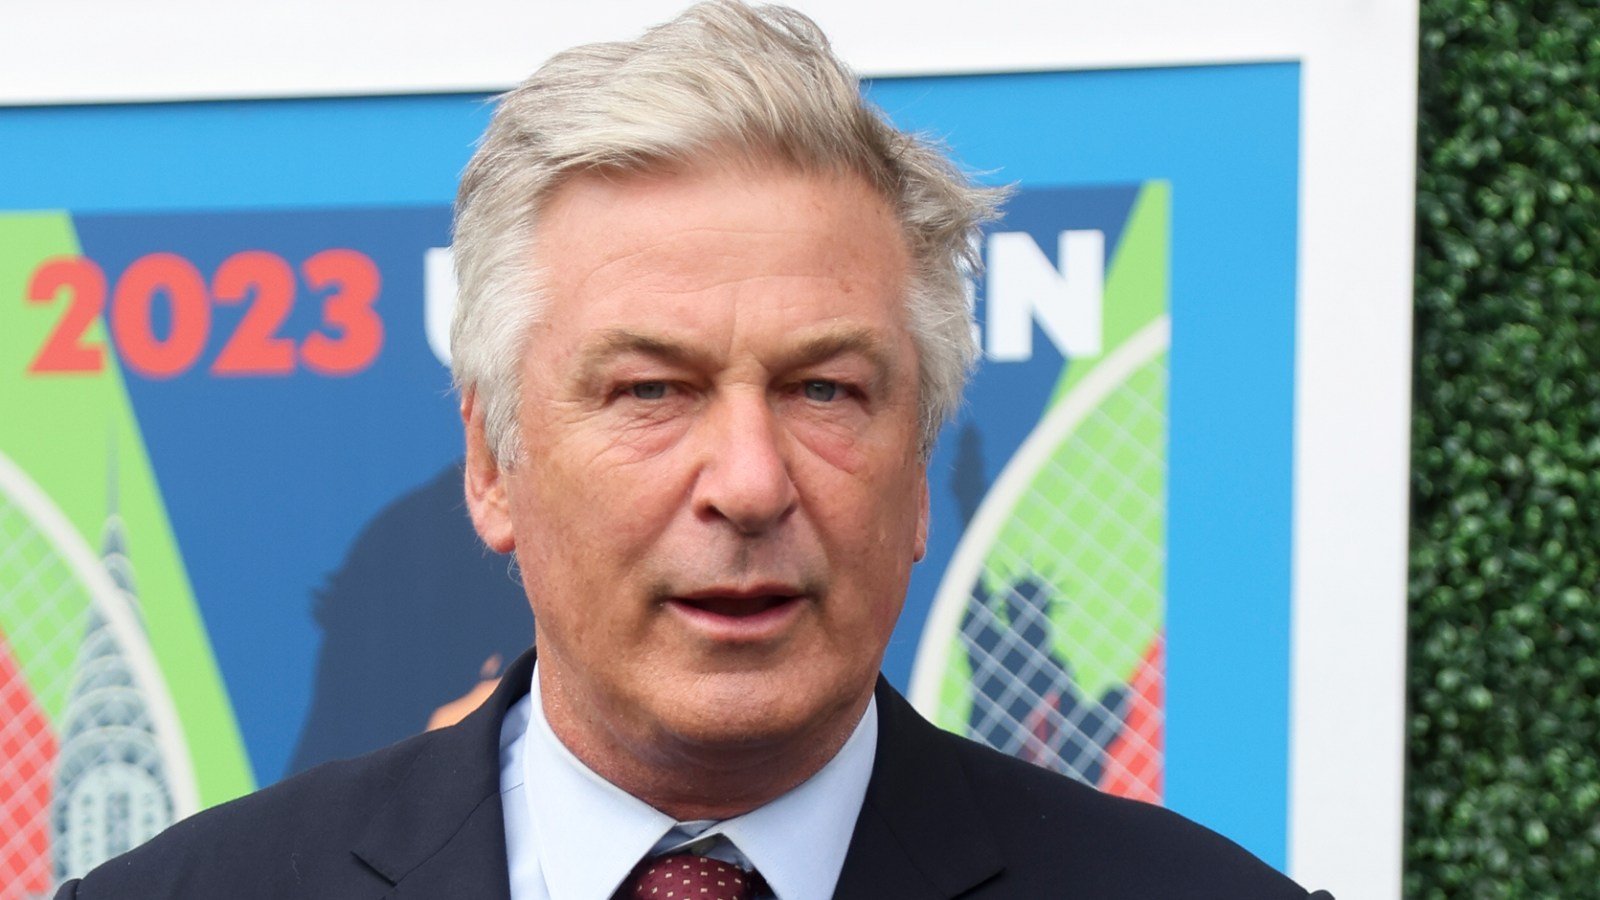 ‘Rust’ Safety Officer Details Alec Baldwin ‘Yelling’ on Set Over Horse Riding Protocol